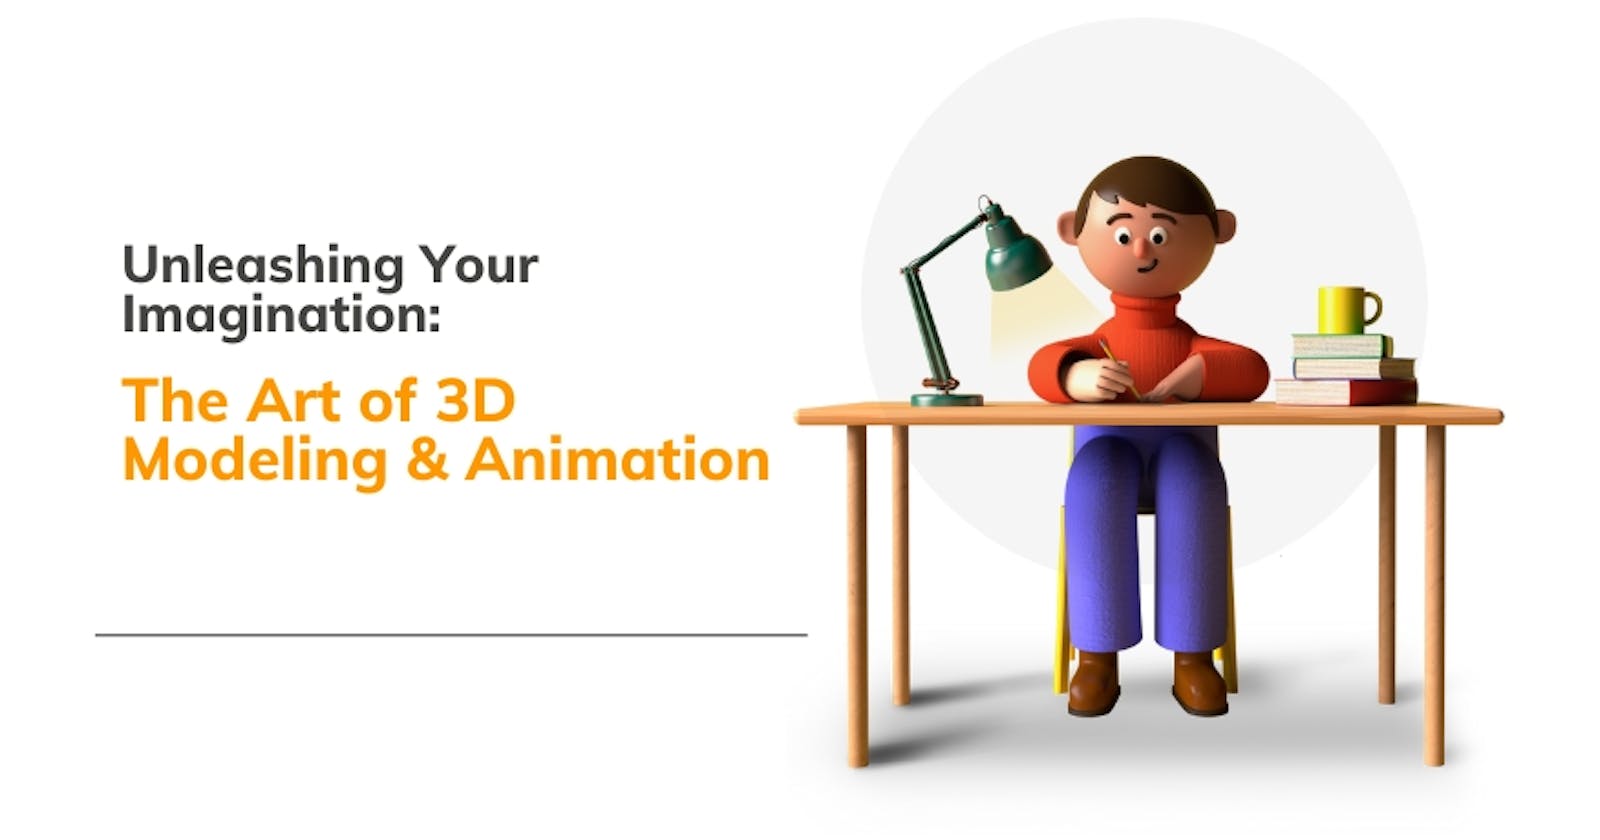 Unleashing Your Imagination: The Art of 3D Modeling & Animation